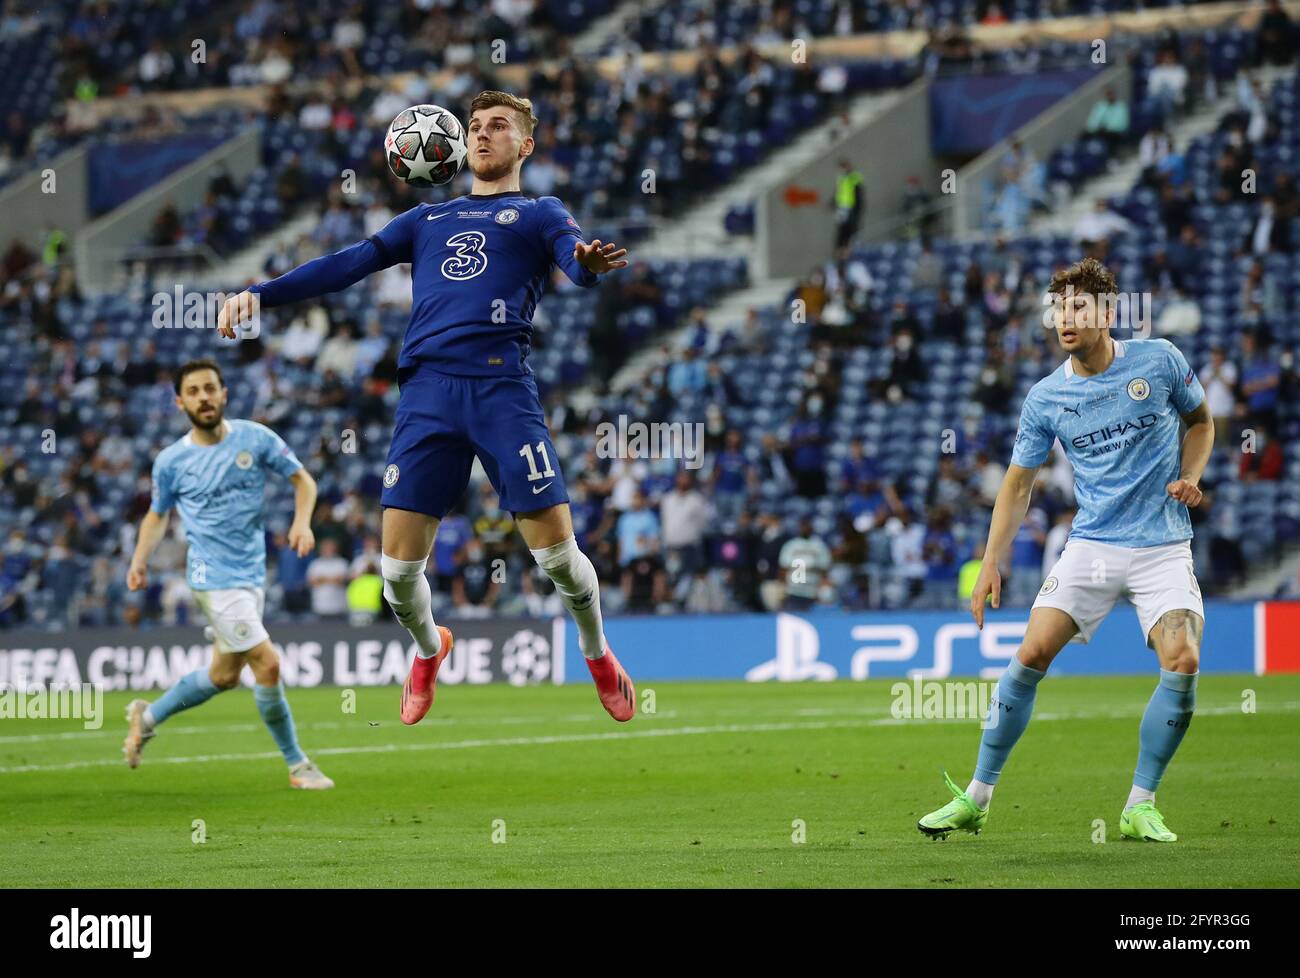 Porto, Portugal, 29th May 2021. Timo Werner of Chelsea leaps up to chest down the ball during the UEFA Champions League match at the Estadio do Dragao, Porto. Picture credit should read: David Klein / Sportimage Stock Photo